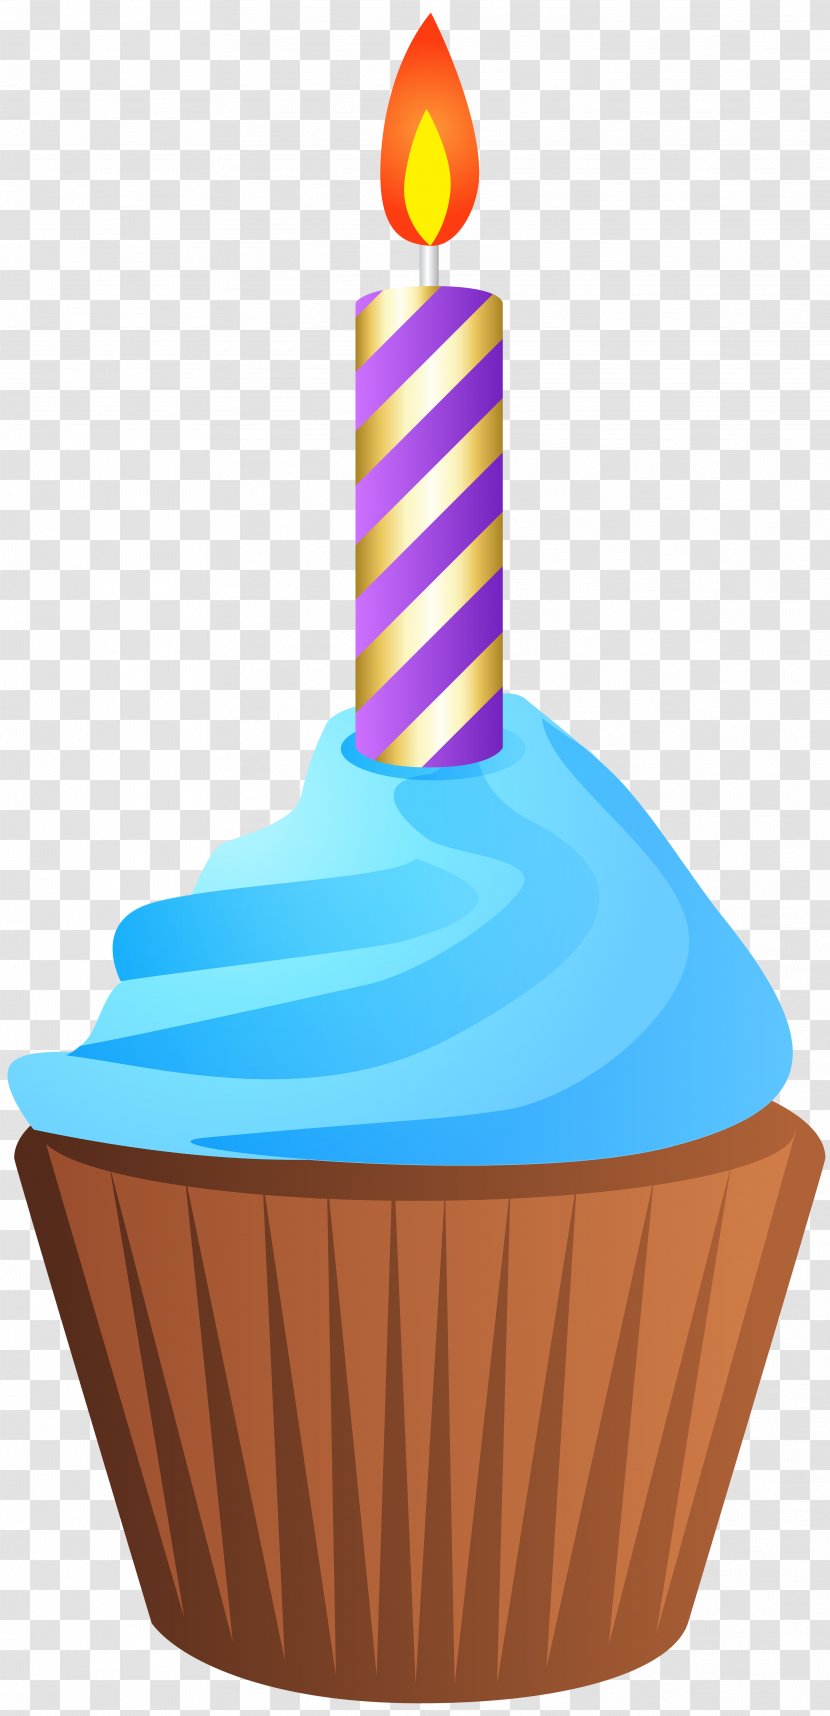 Muffin Birthday Cake Clip Art - Candle - With Transparent Image Transparent PNG